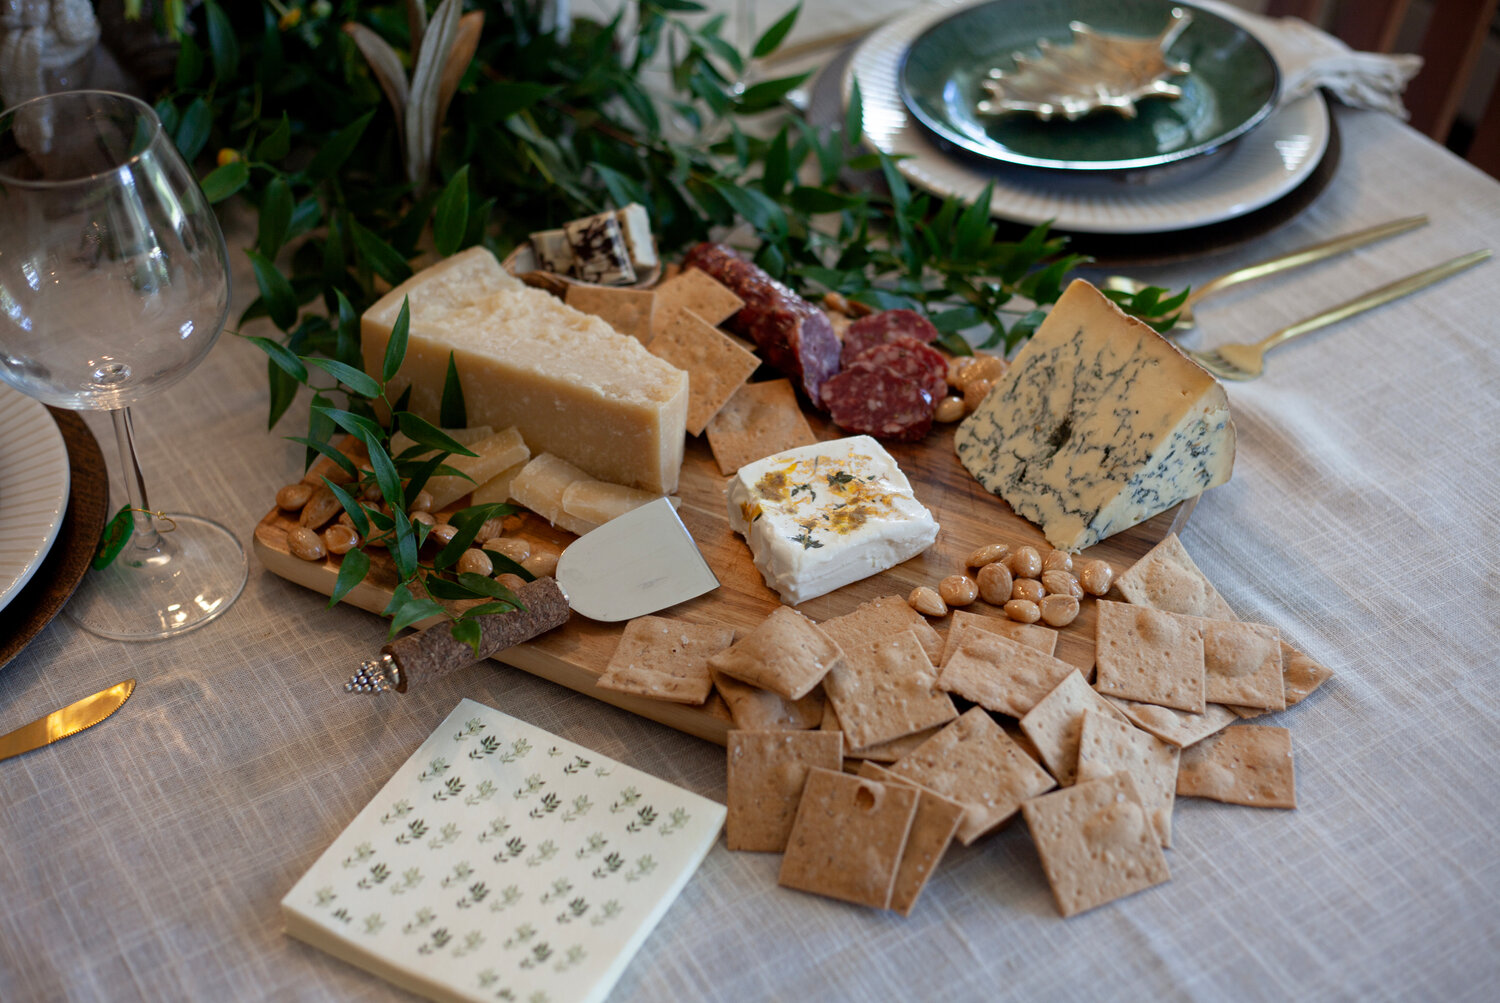 A cheese board topped with an artisanal array makes for a rustic and casual start to any gathering